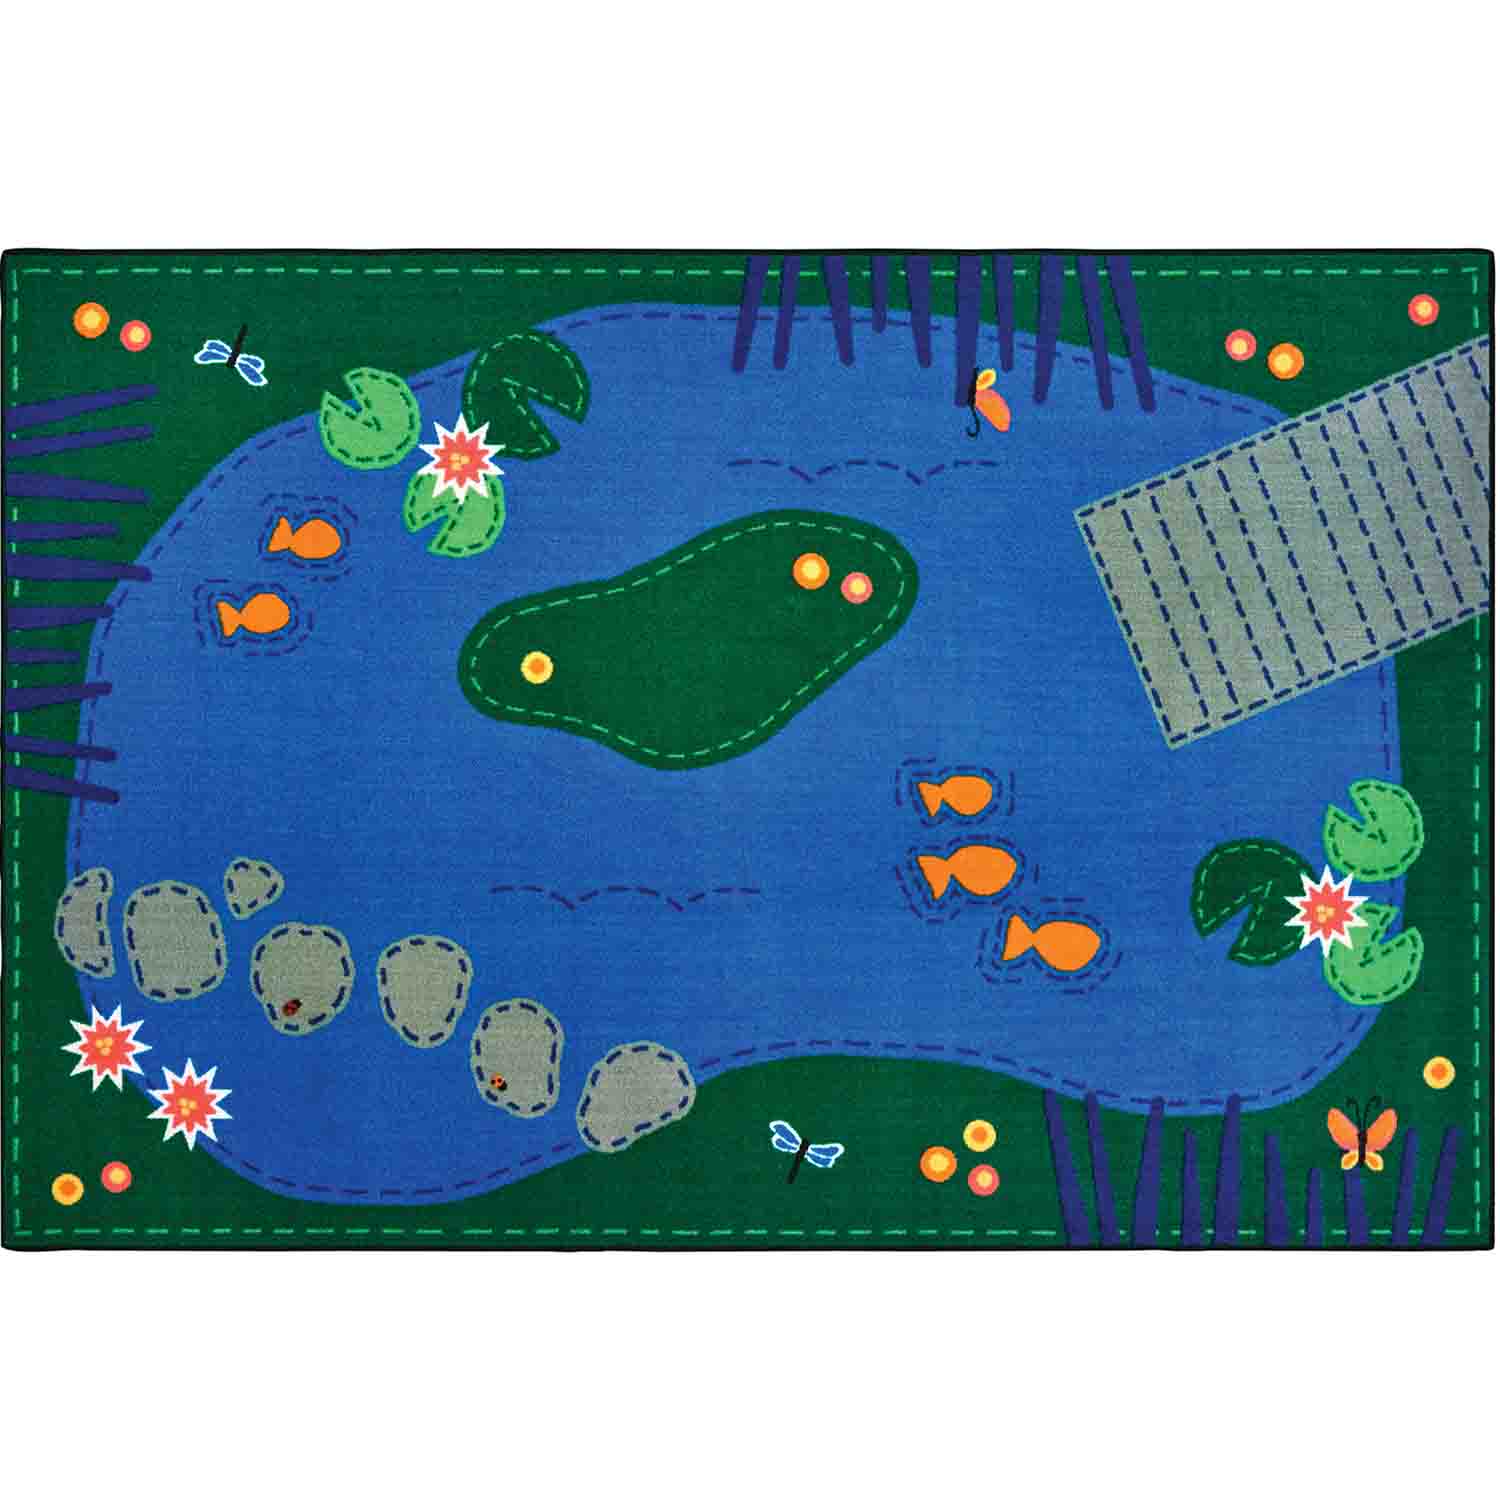 KID$ Value Classroom Rugs™, Tranquil Pond, Rectangle 3' x 4'6" Blue